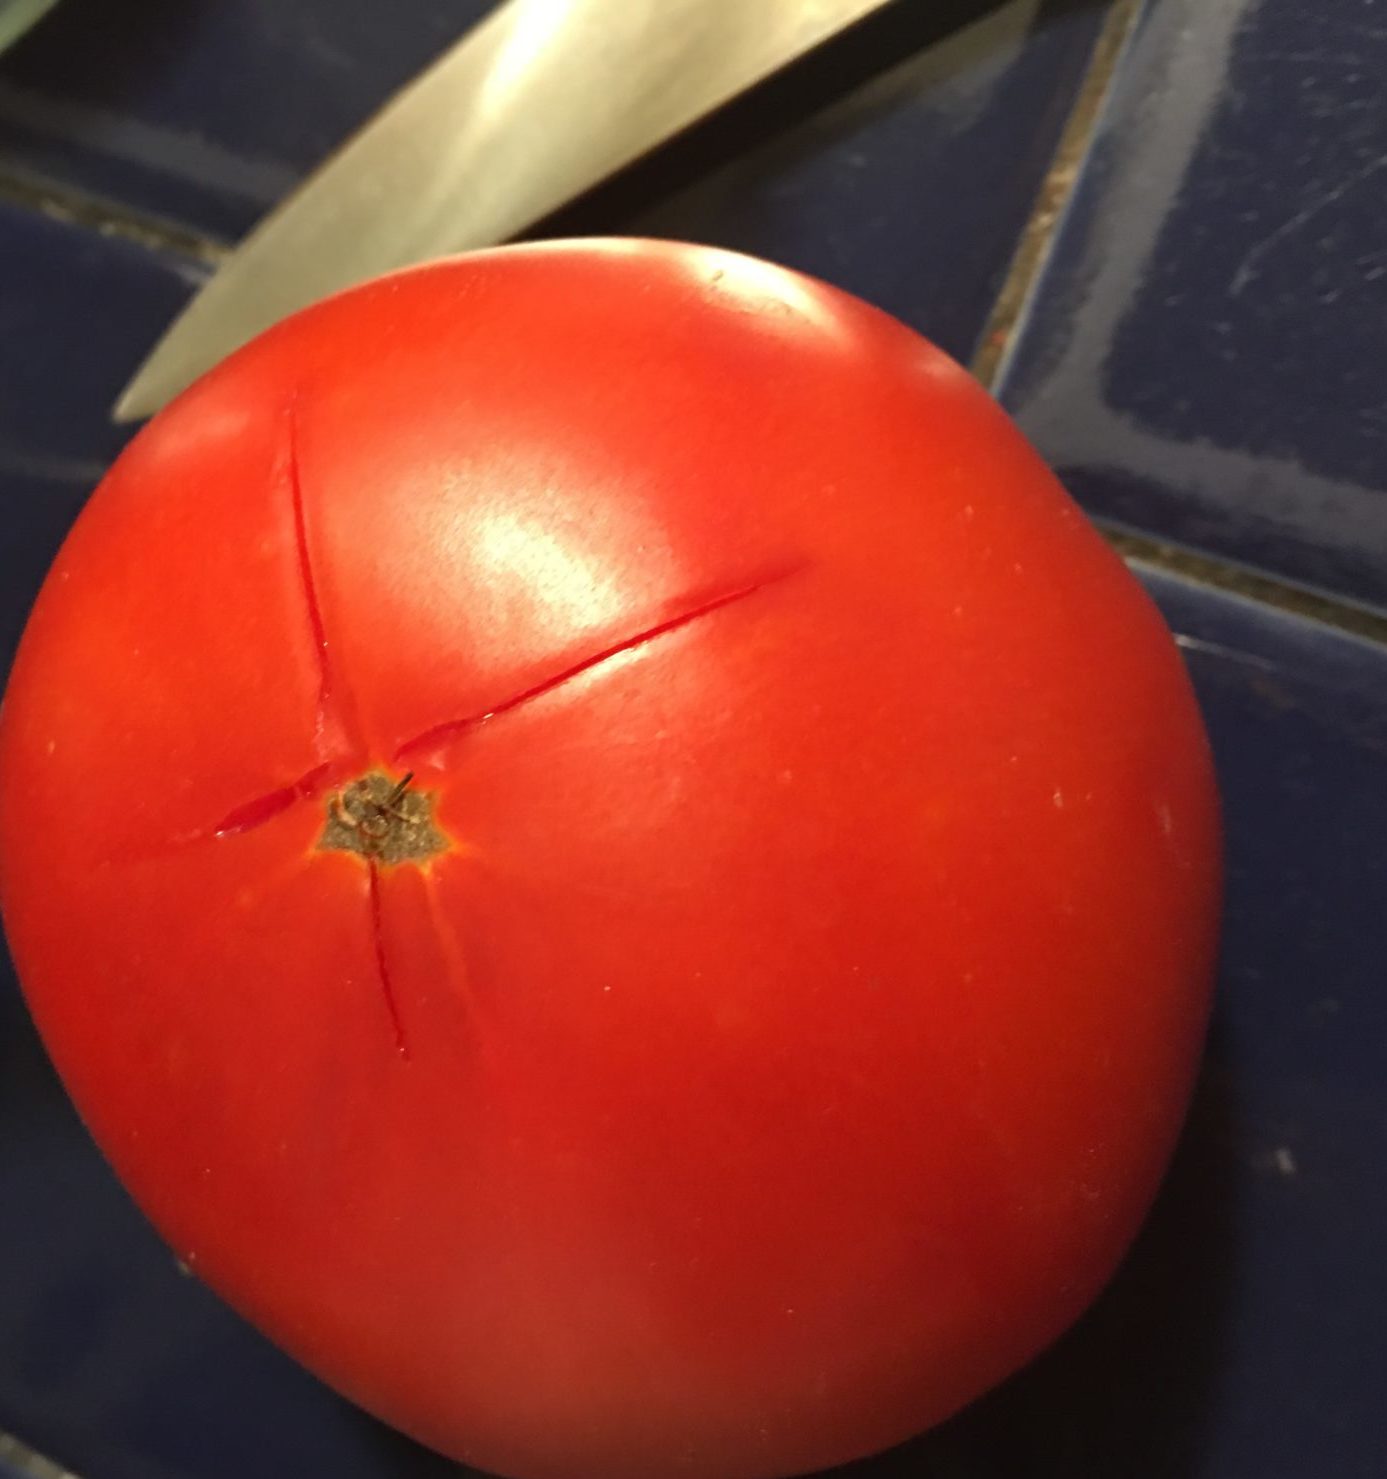 Tomato with cross cut in end